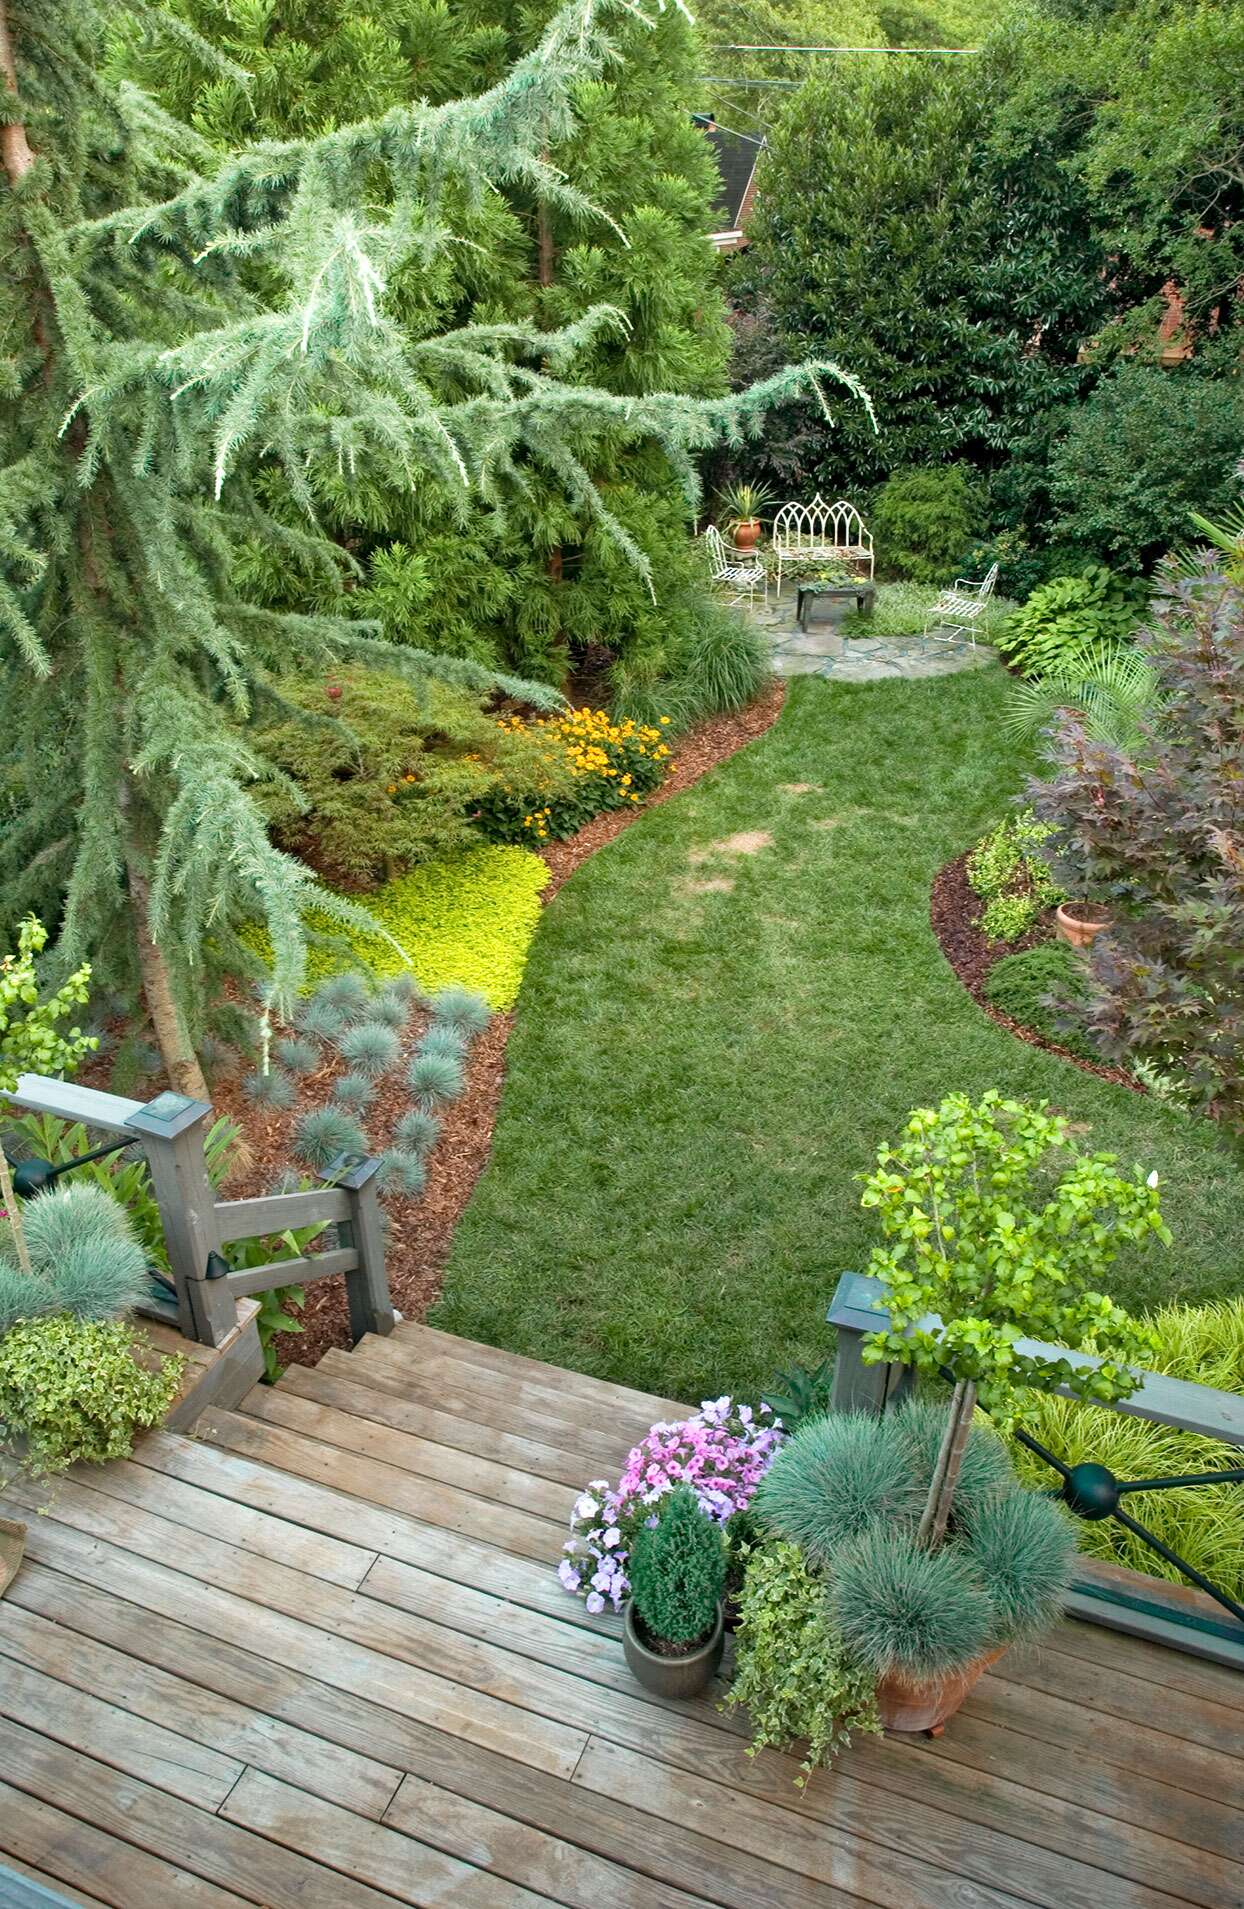 How to Care for a Landscape Garden
